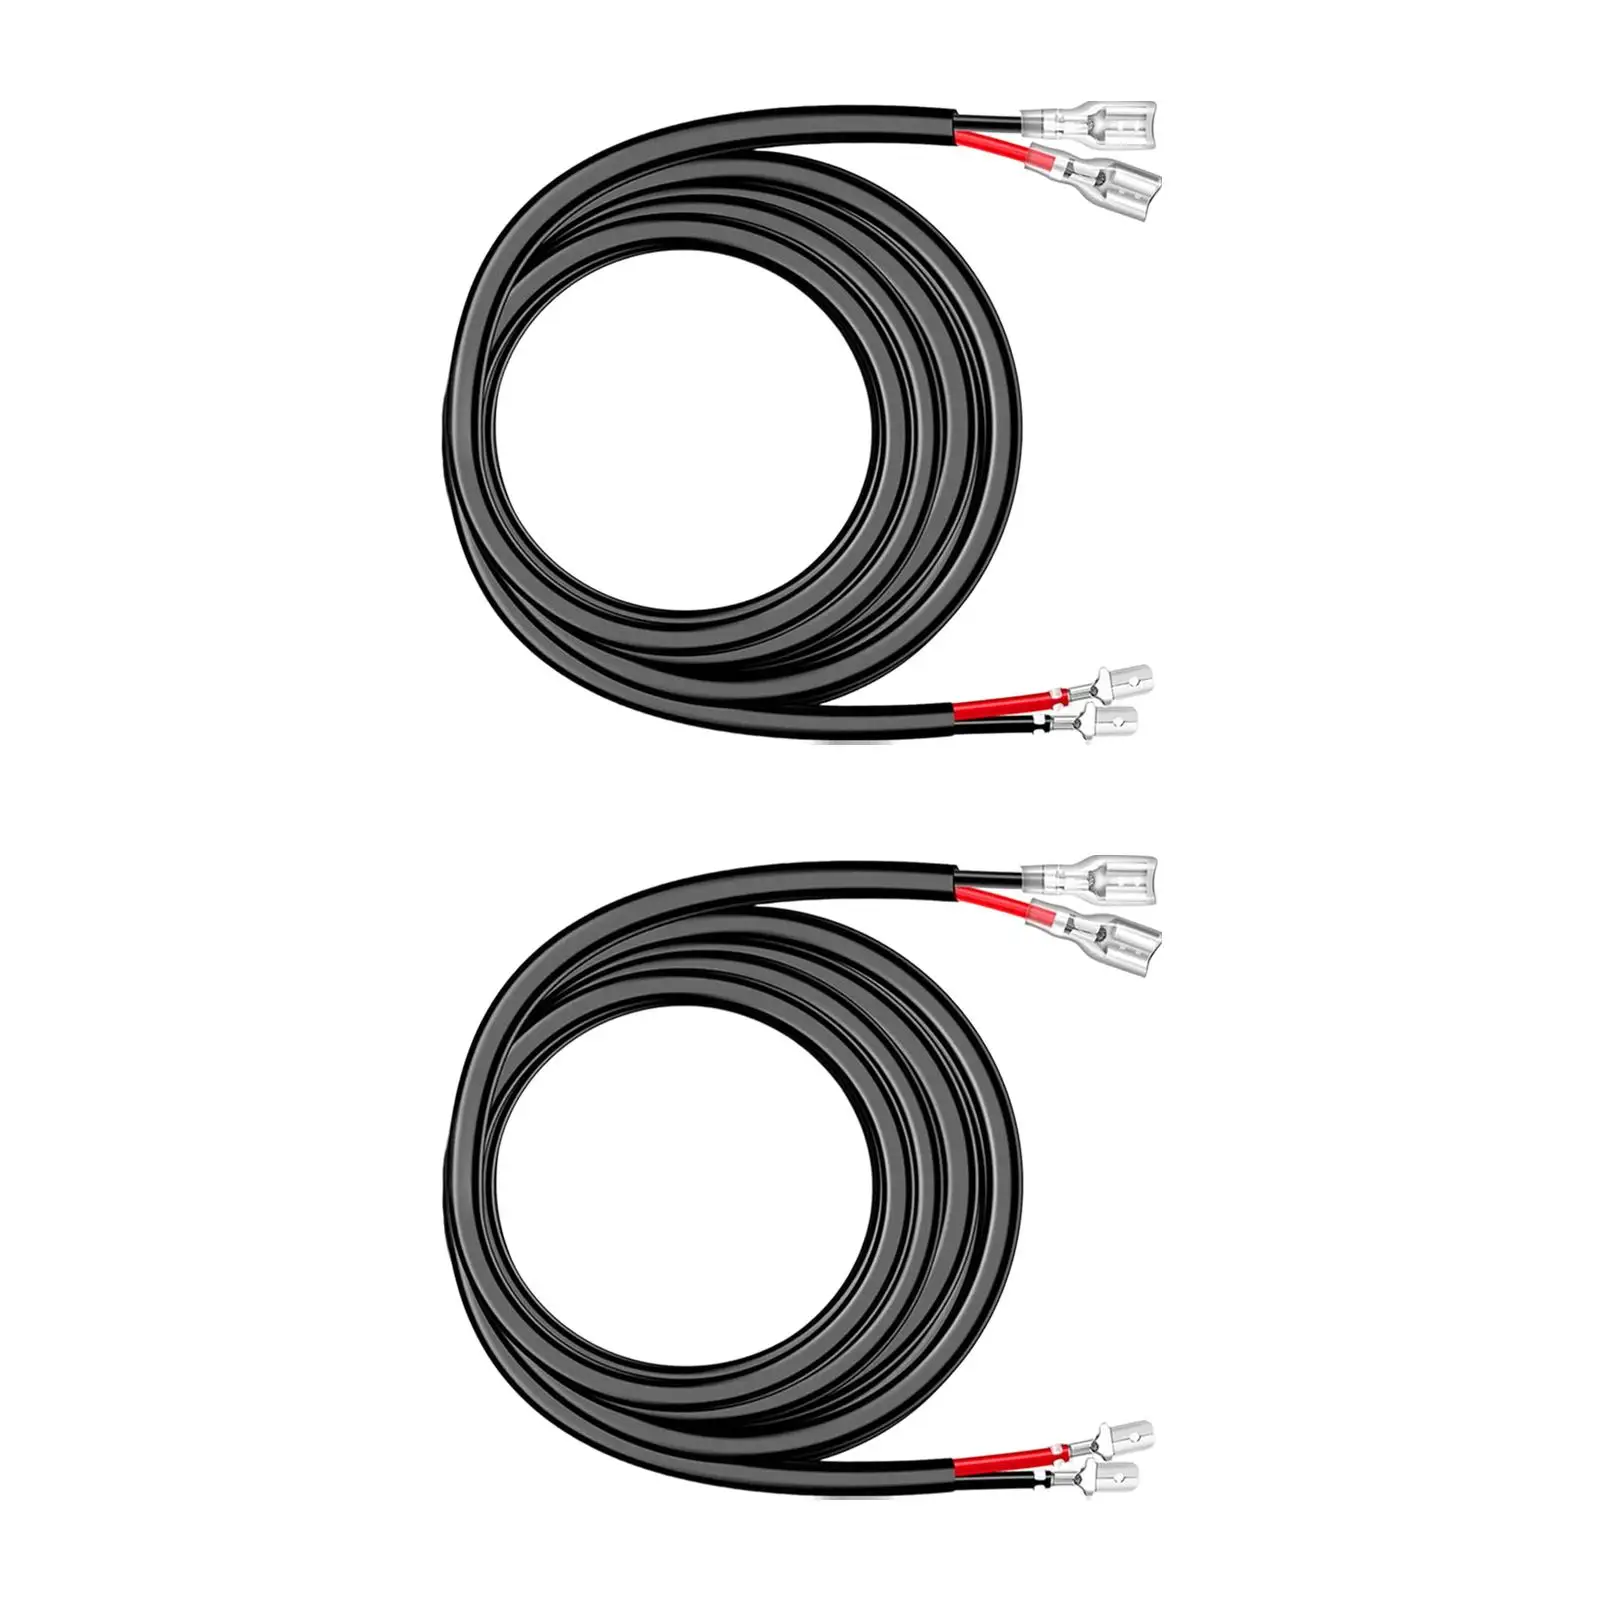 2Pcs Multipurpose Extension Wiring Harness Plug and Play Extender Wire Cord High Performance for Headlight Car RV Accessory